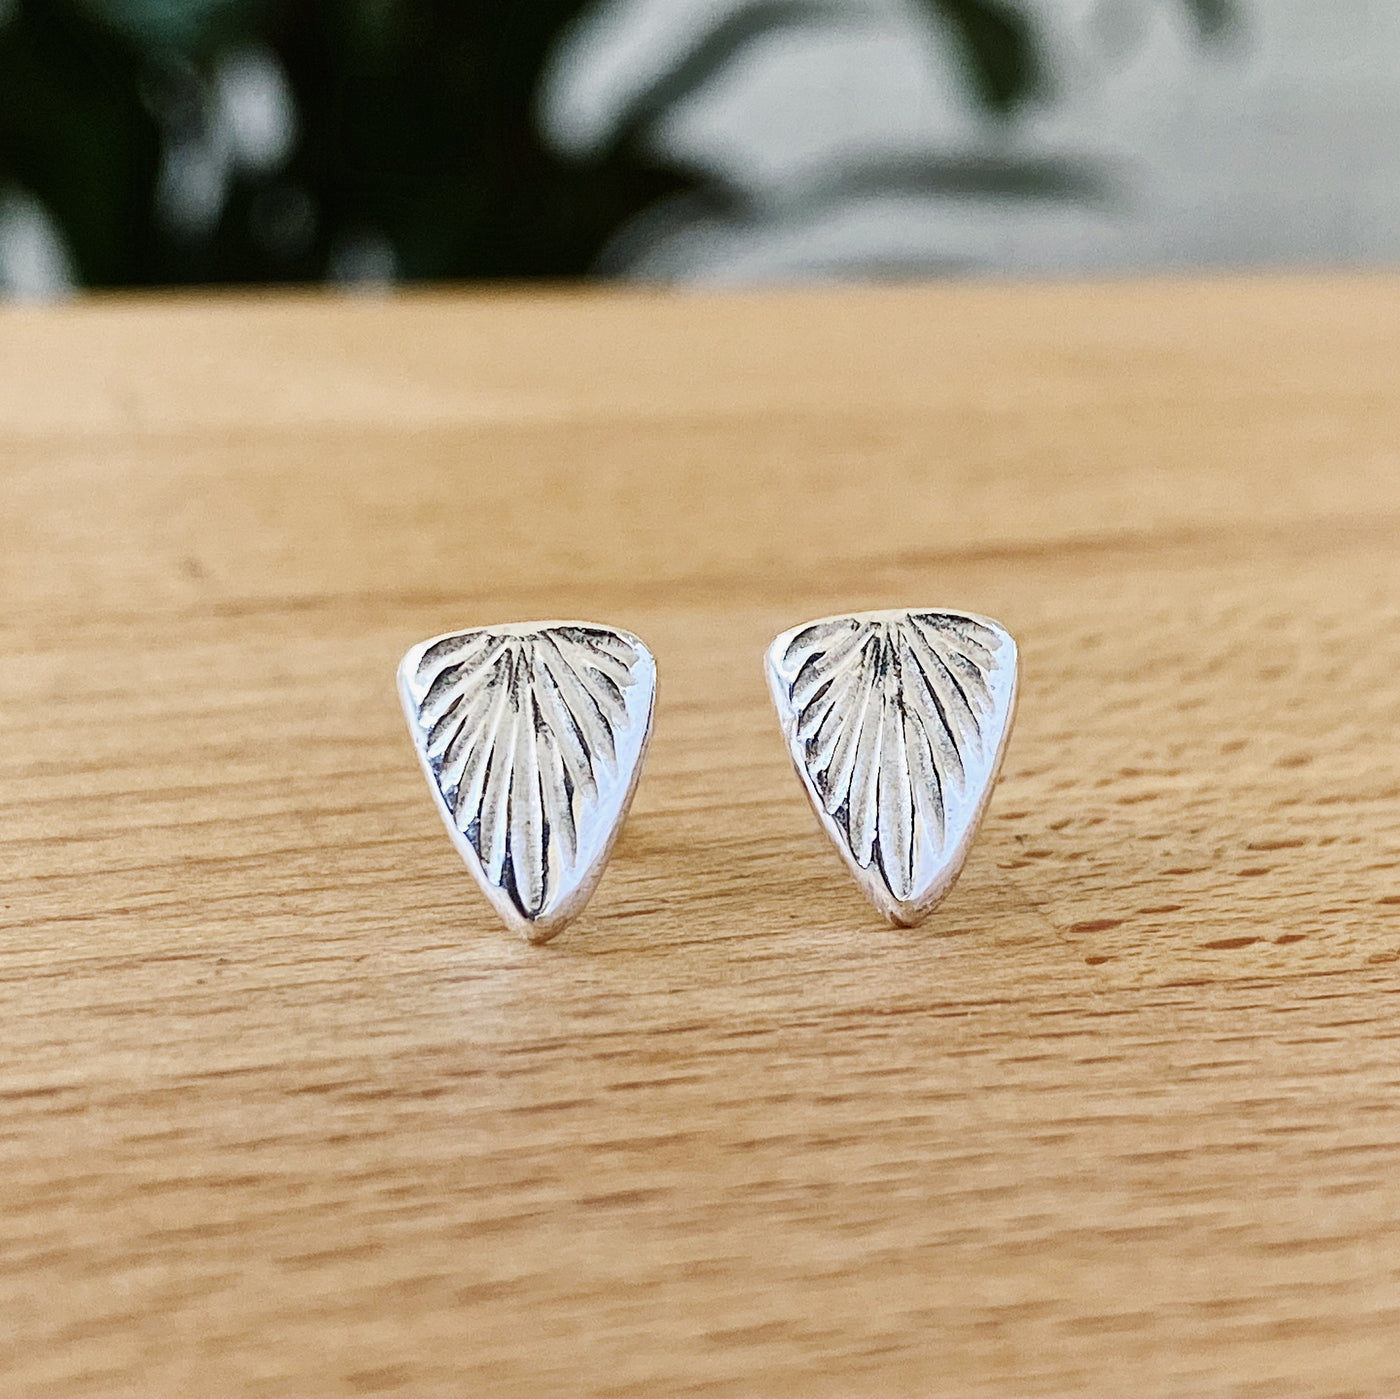 Sterling silver triangular stud earrings with a carved sunburst texture by Corey Egan on a tabletop